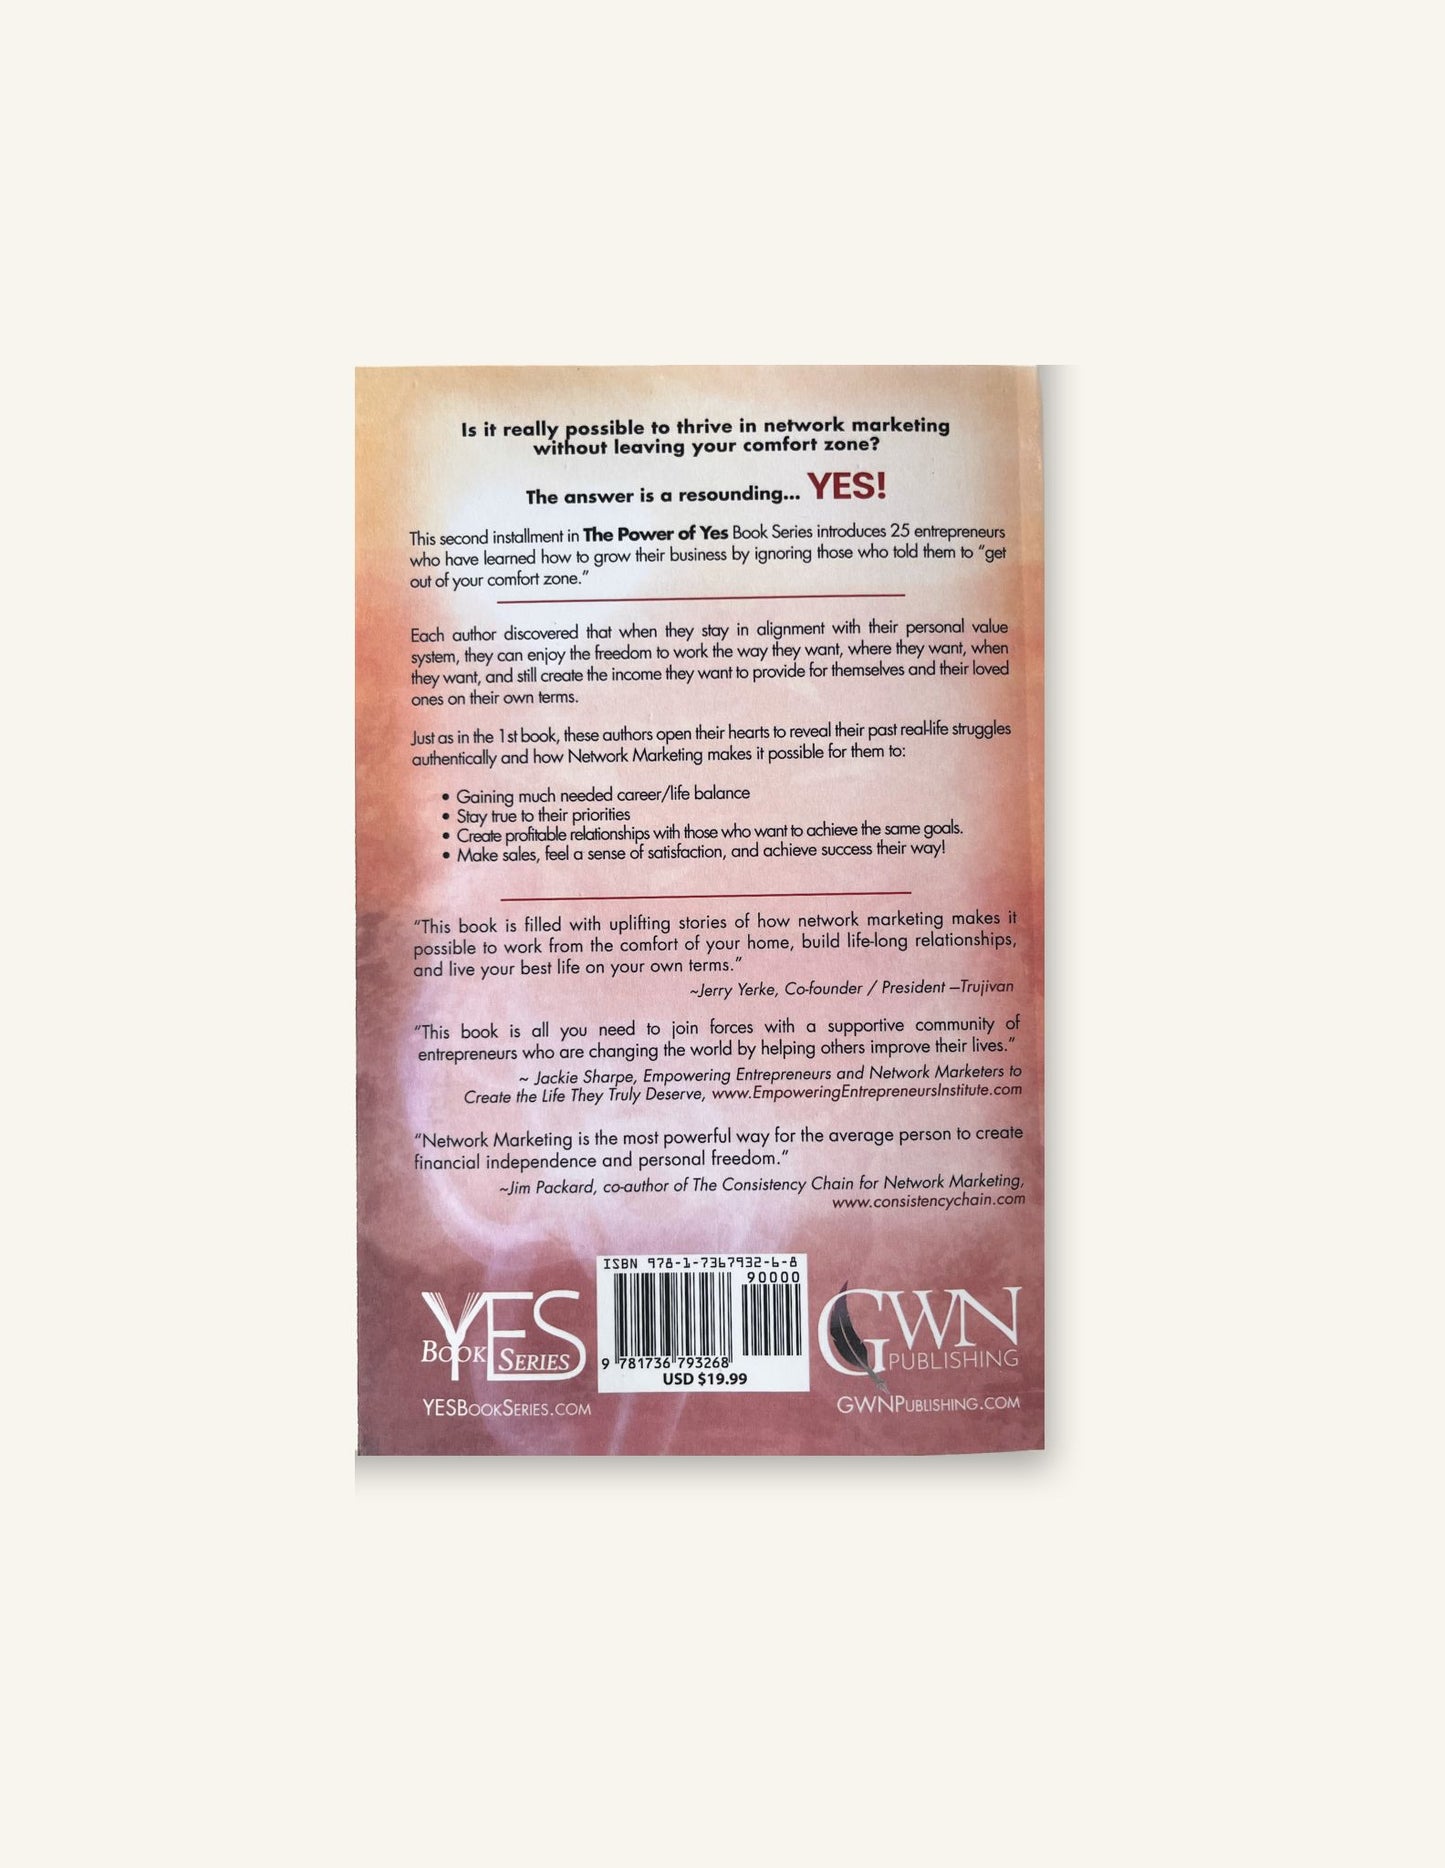 The Power of Yes Presents: Building Your Network Marketing Business Without Leaving Your Comfort